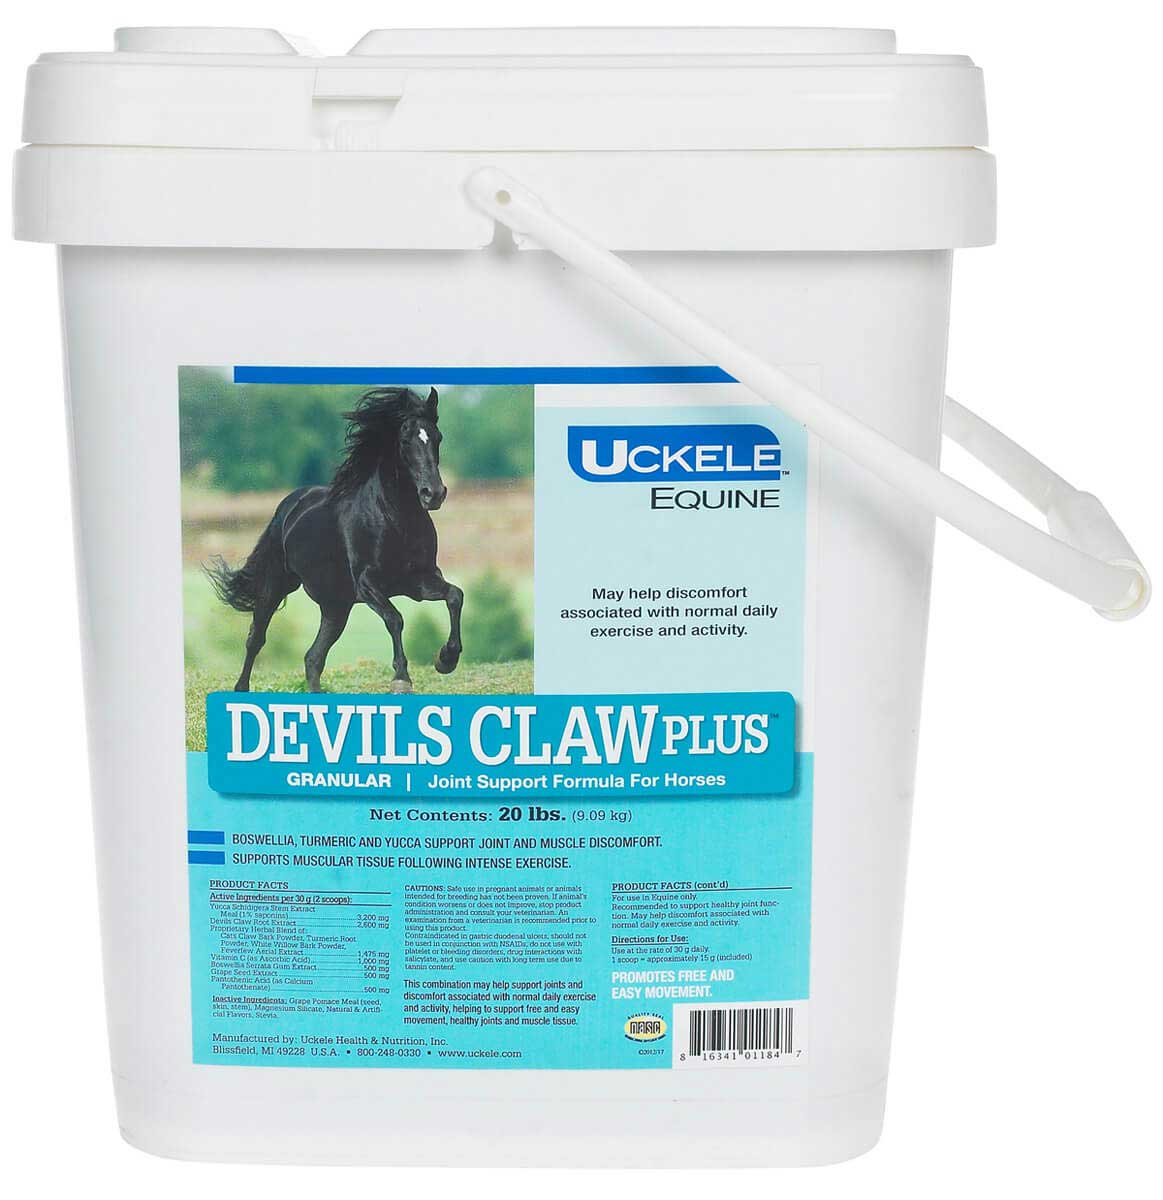 For Horses Wendals Devils Claw Root